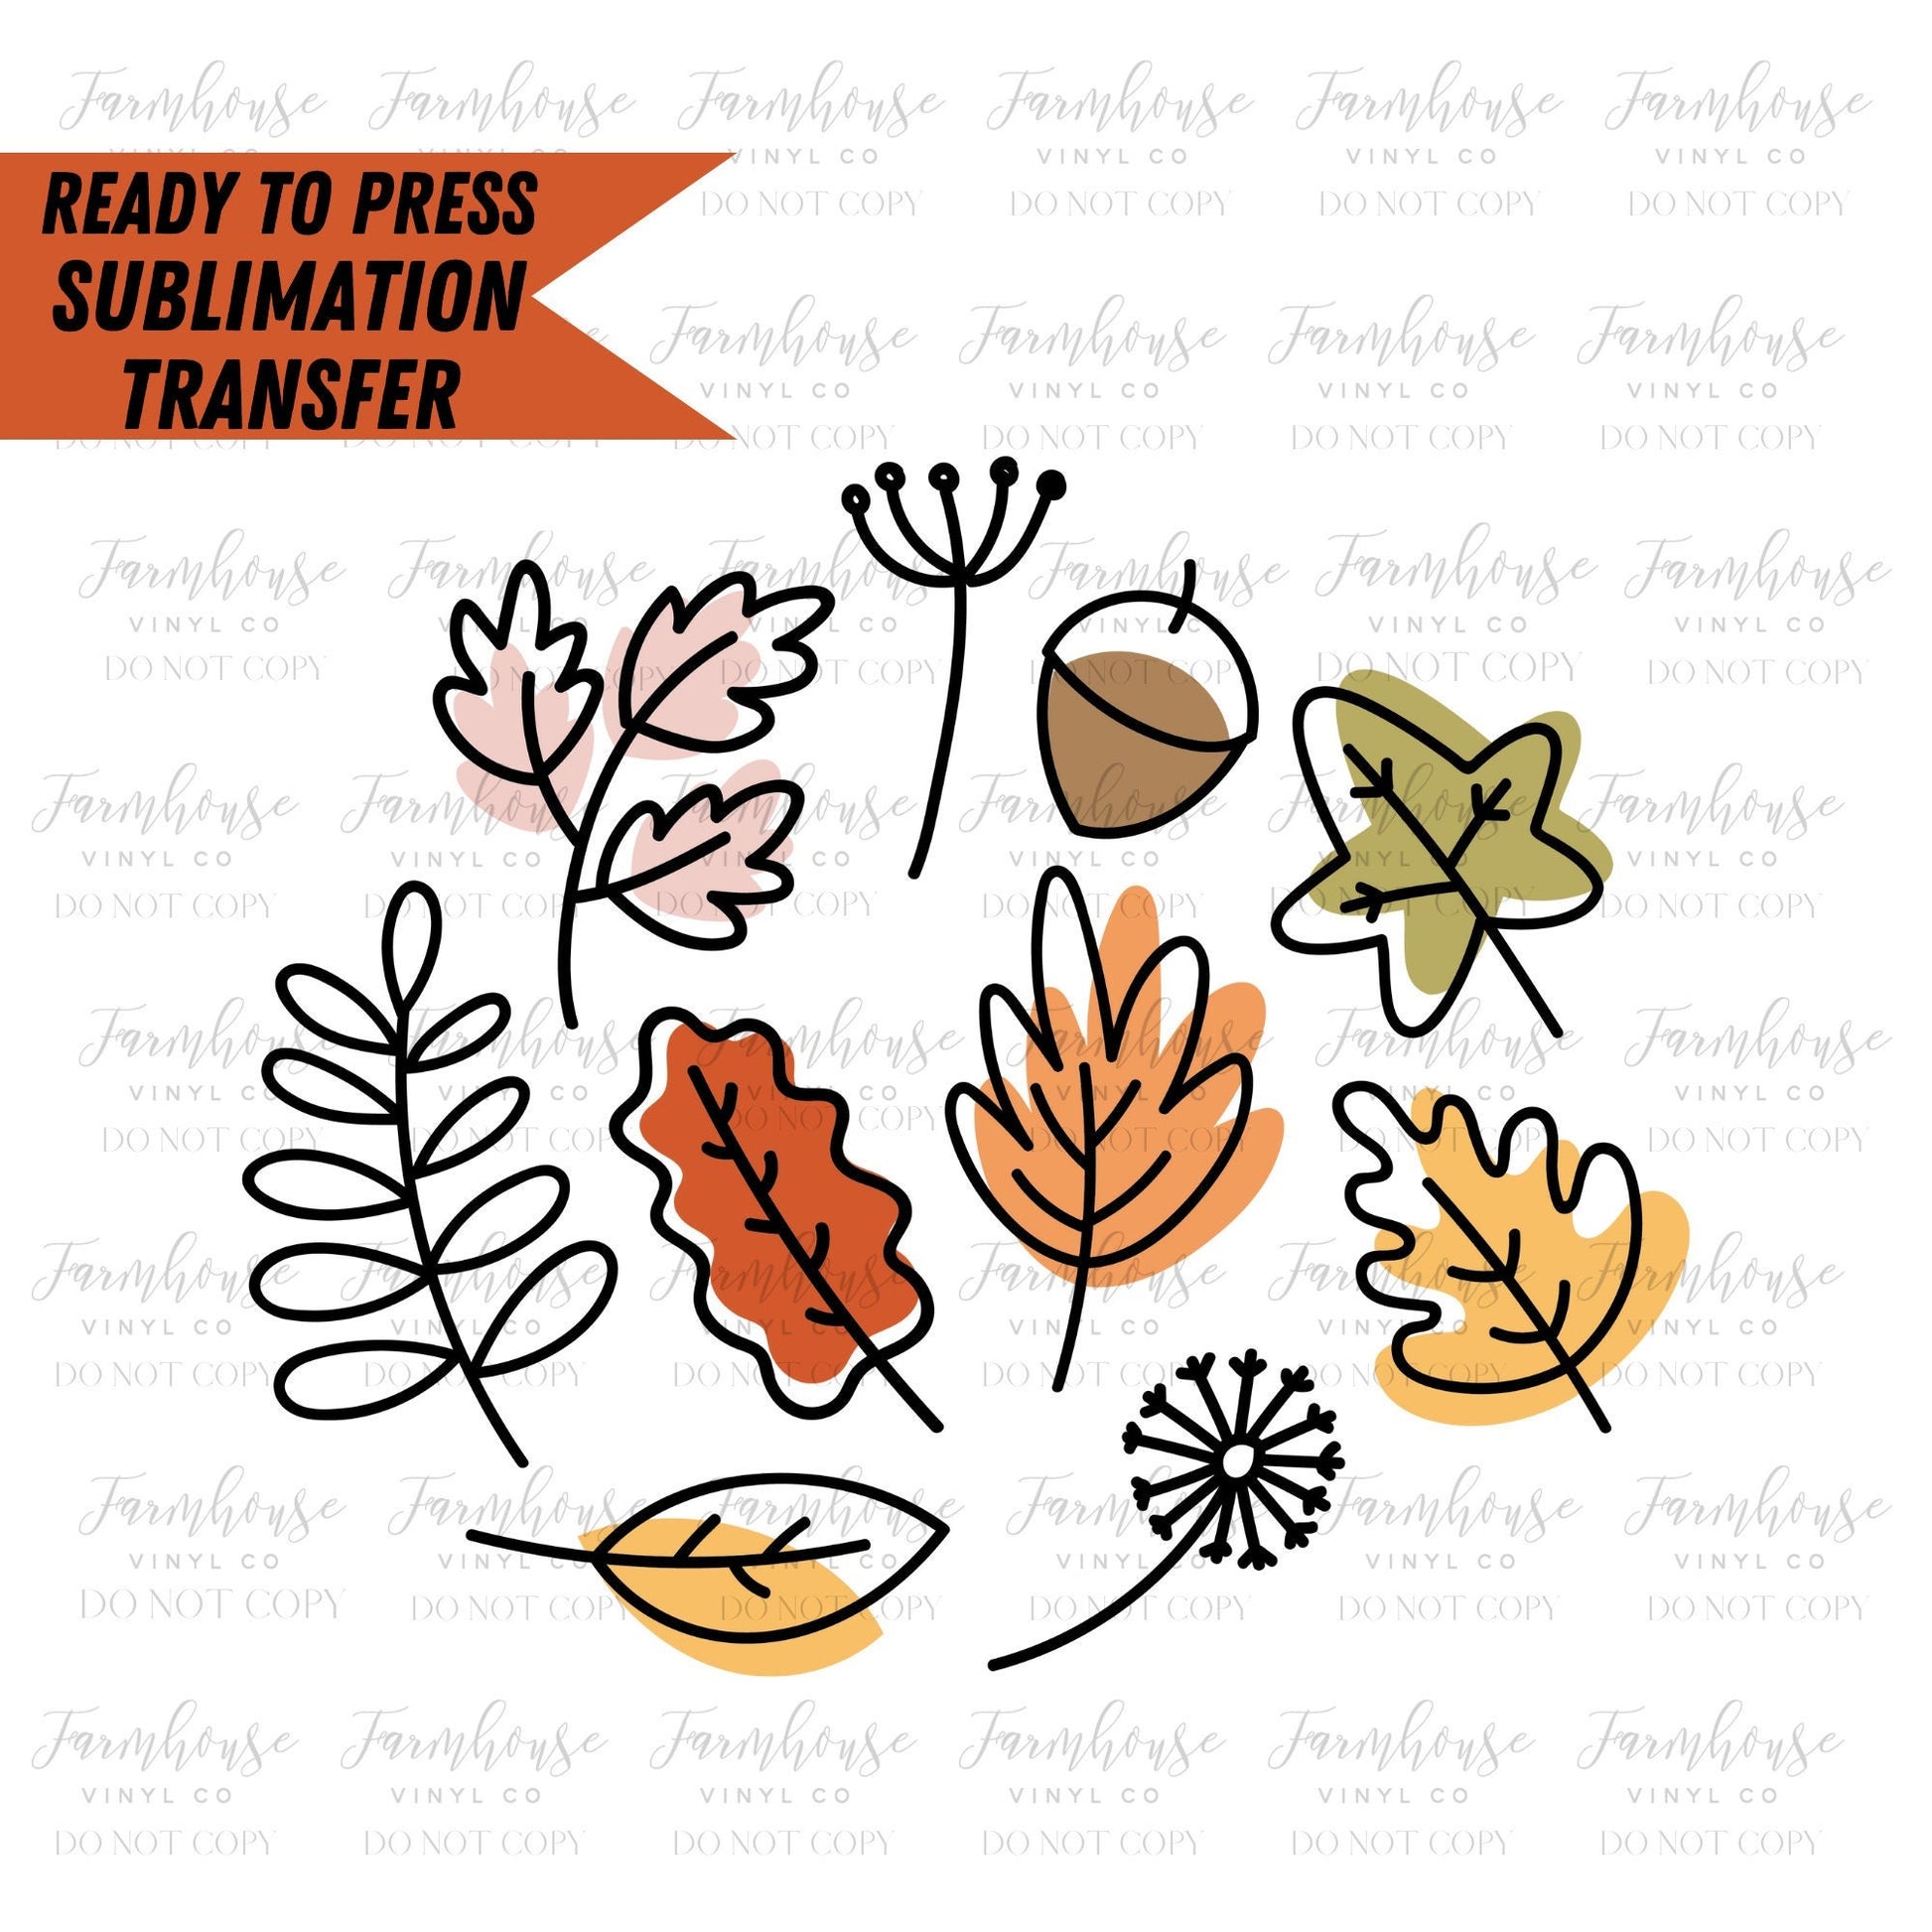 Fall Leaves Little Things, Ready to Press Sublimation Transfer, Trending Graphic 22, Sublimation Prints, Fall Sketch Design - Farmhouse Vinyl Co